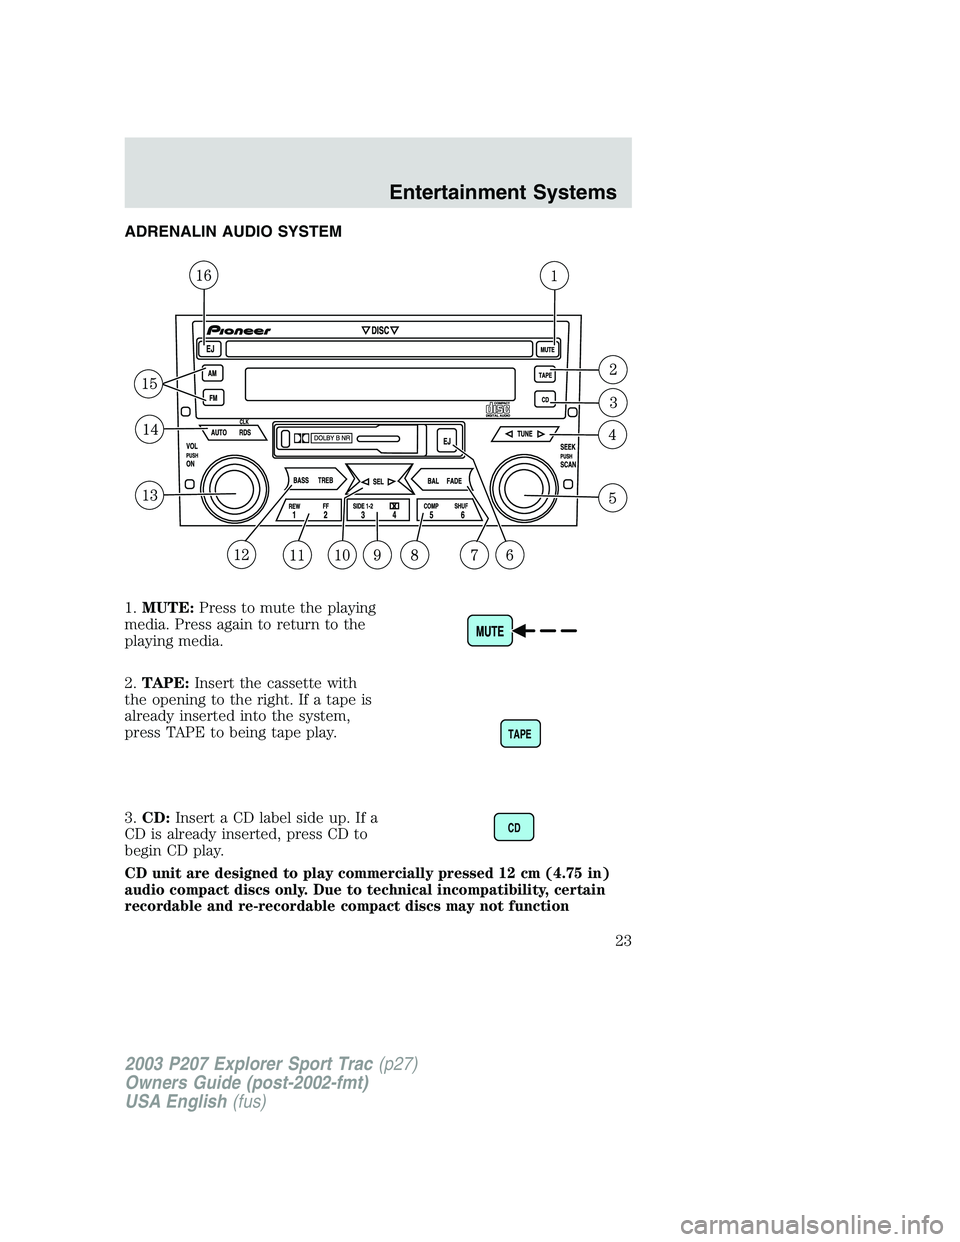 FORD EXPLORER SPORT TRAC 2003  Owners Manual ADRENALIN AUDIO SYSTEM
1.MUTE: Press to mute the playing
media. Press again to return to the
playing media.
2. TAPE: Insert the cassette with
the opening to the right. If a tape is
already inserted in